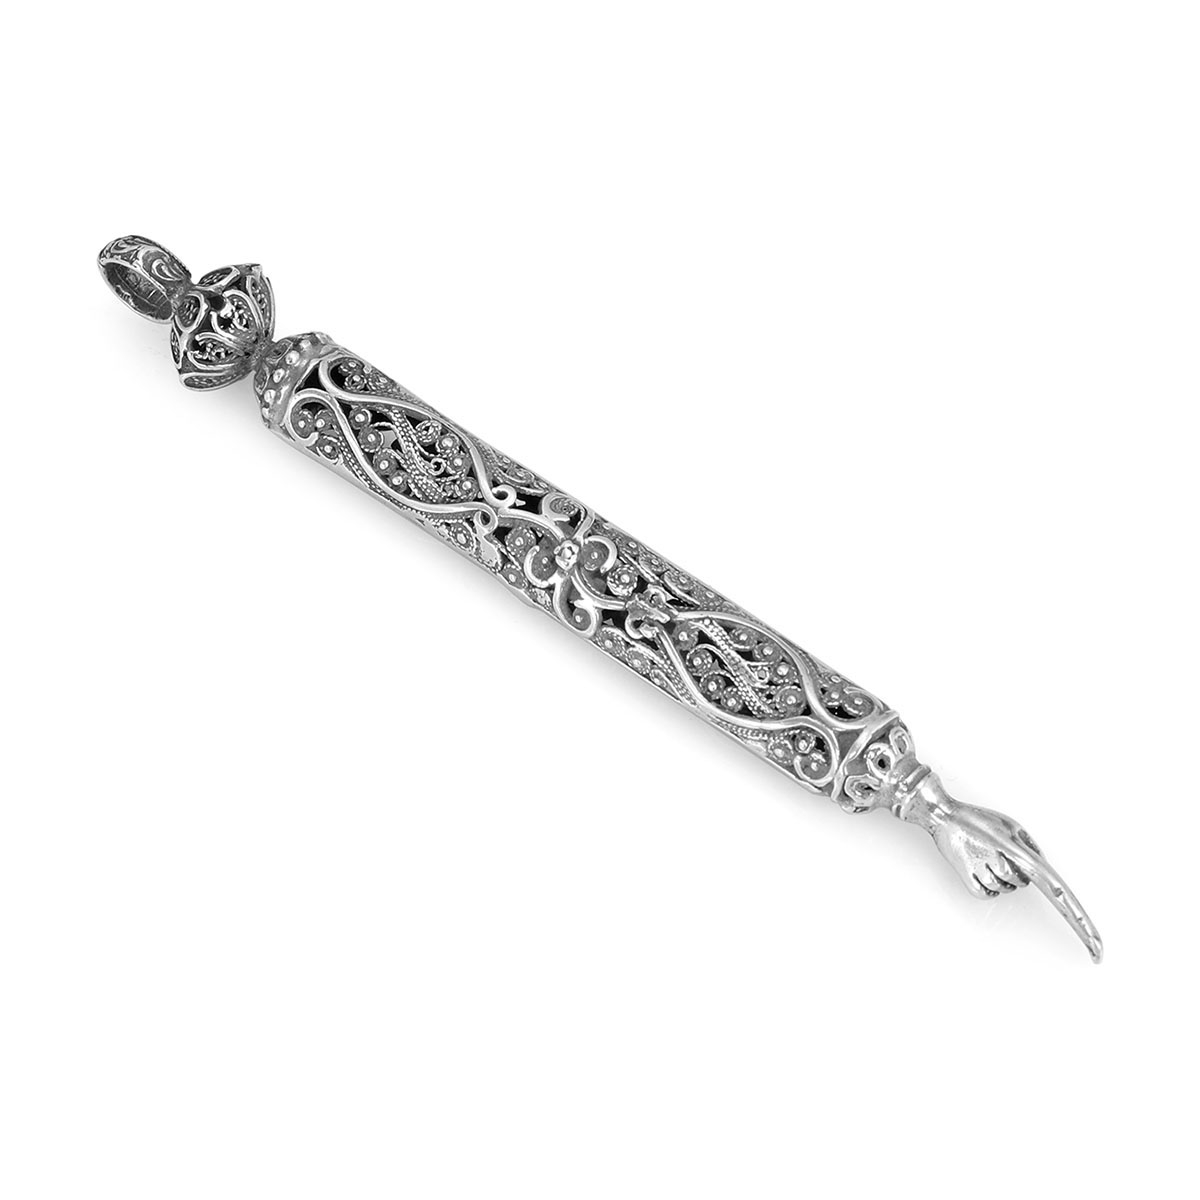 Traditional Yemenite Art Handcrafted Sterling Silver Torah Pointer With Filigree Design - 1